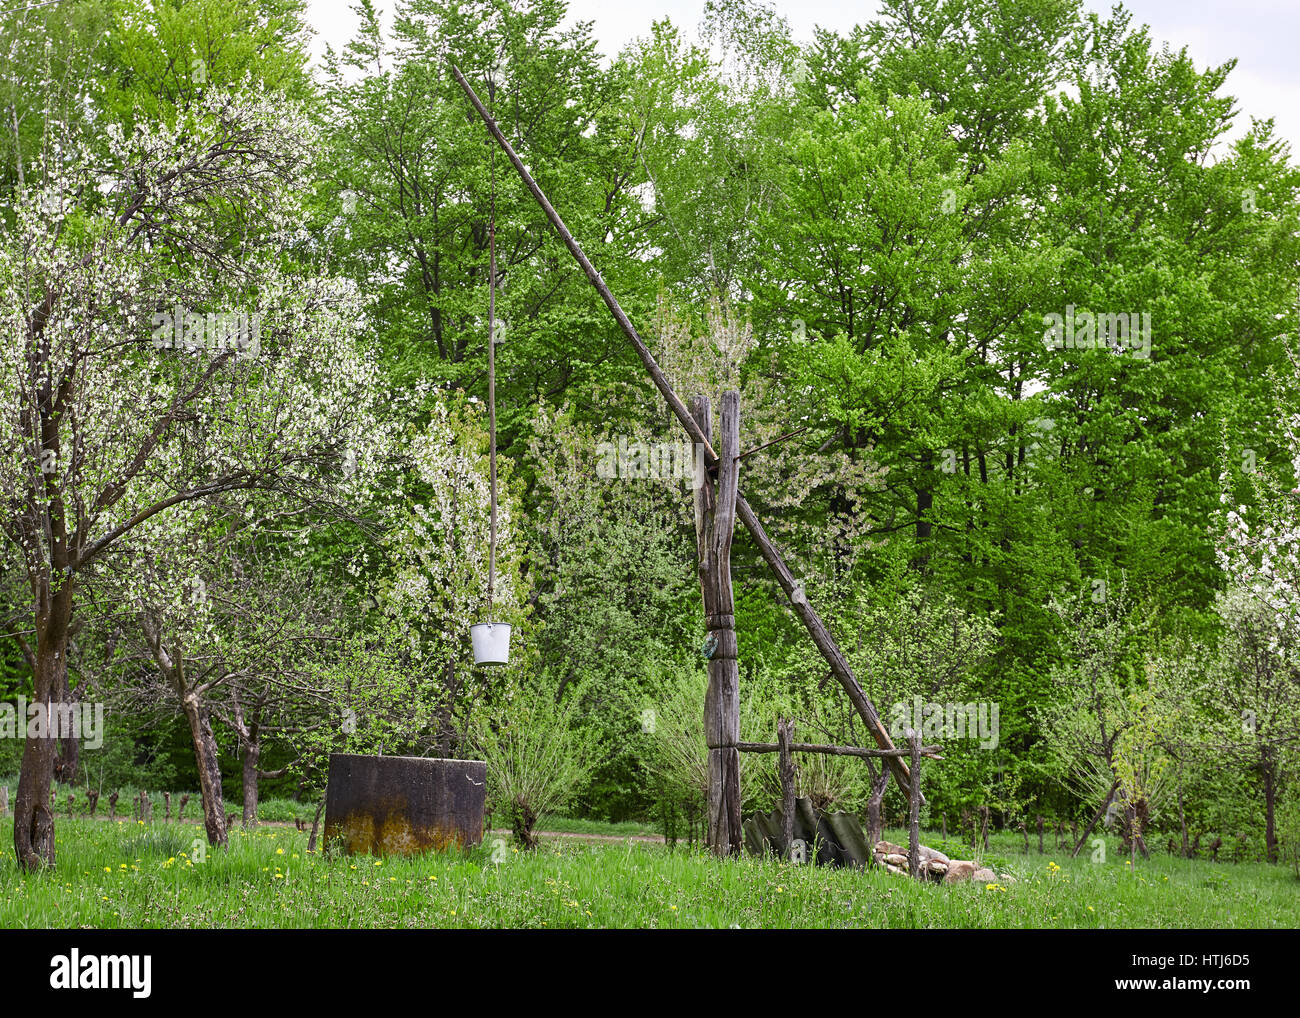 Old wooden shadoof in green forest Stock Photo